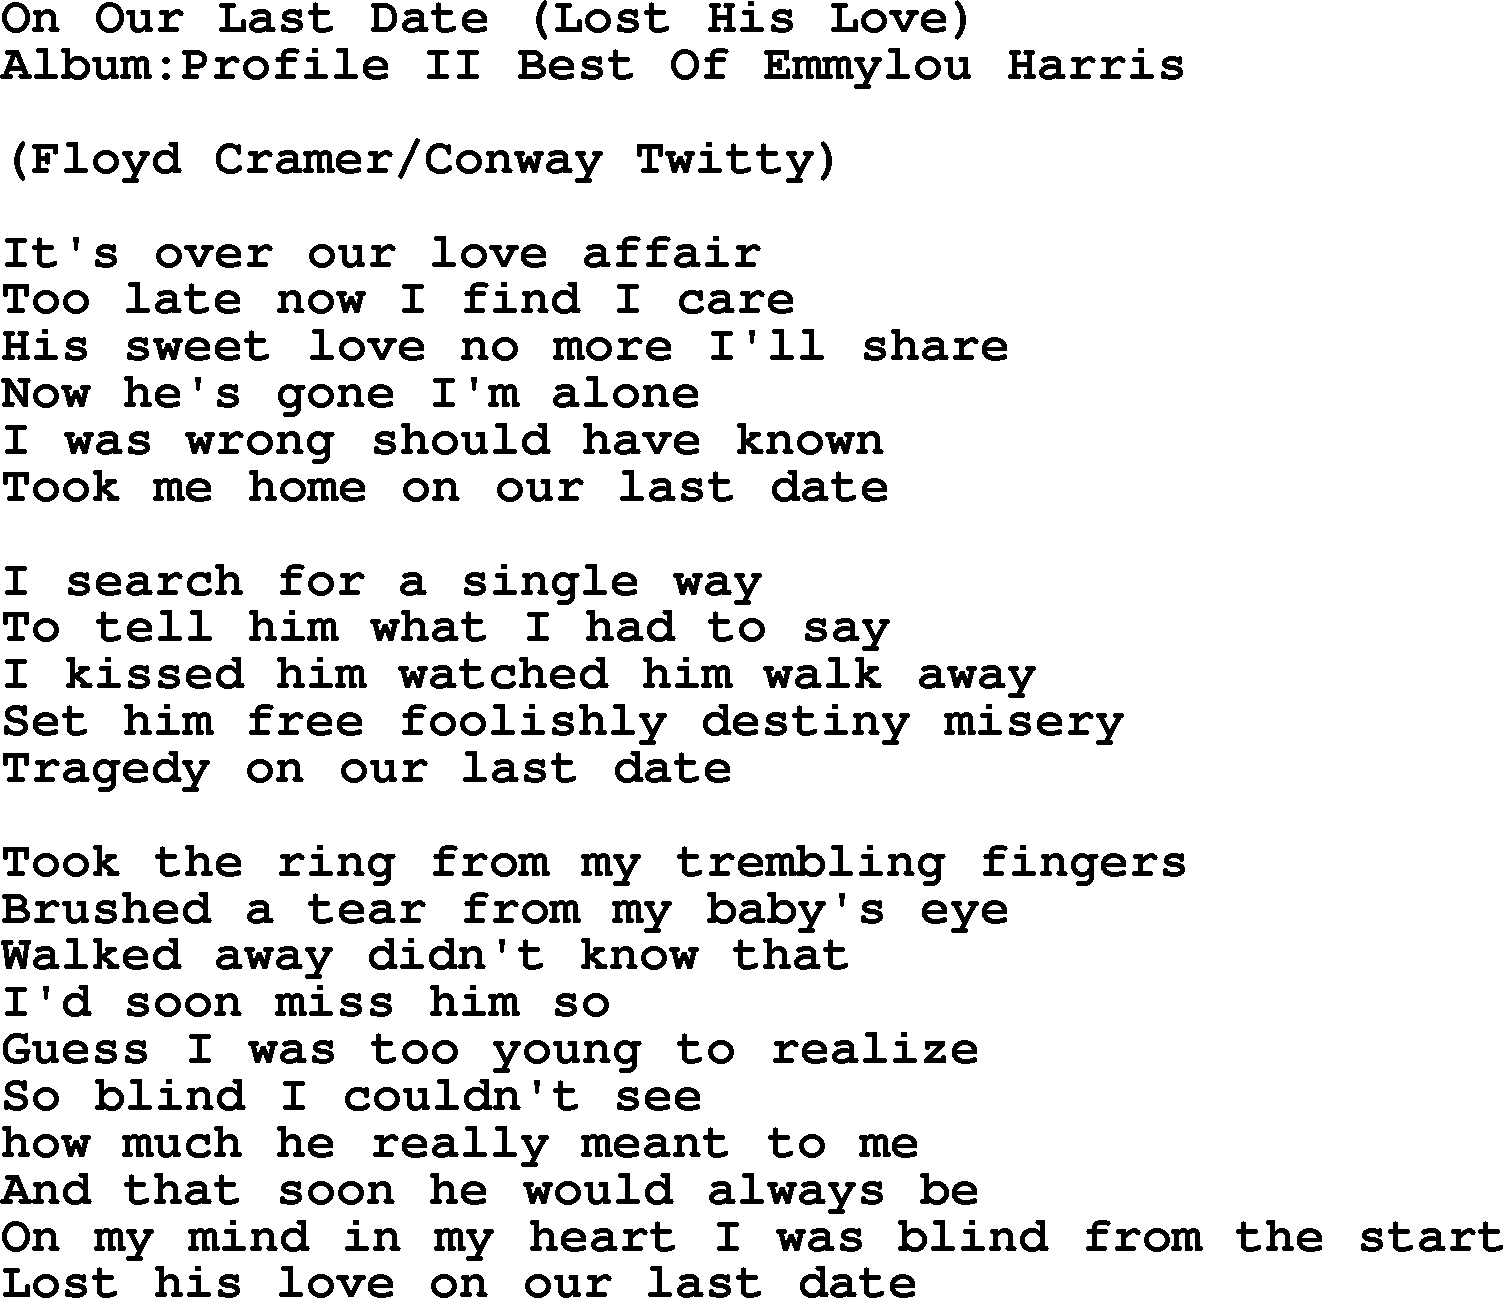 Emmylou Harris song: On Our Last Date (Lost His Love) lyrics